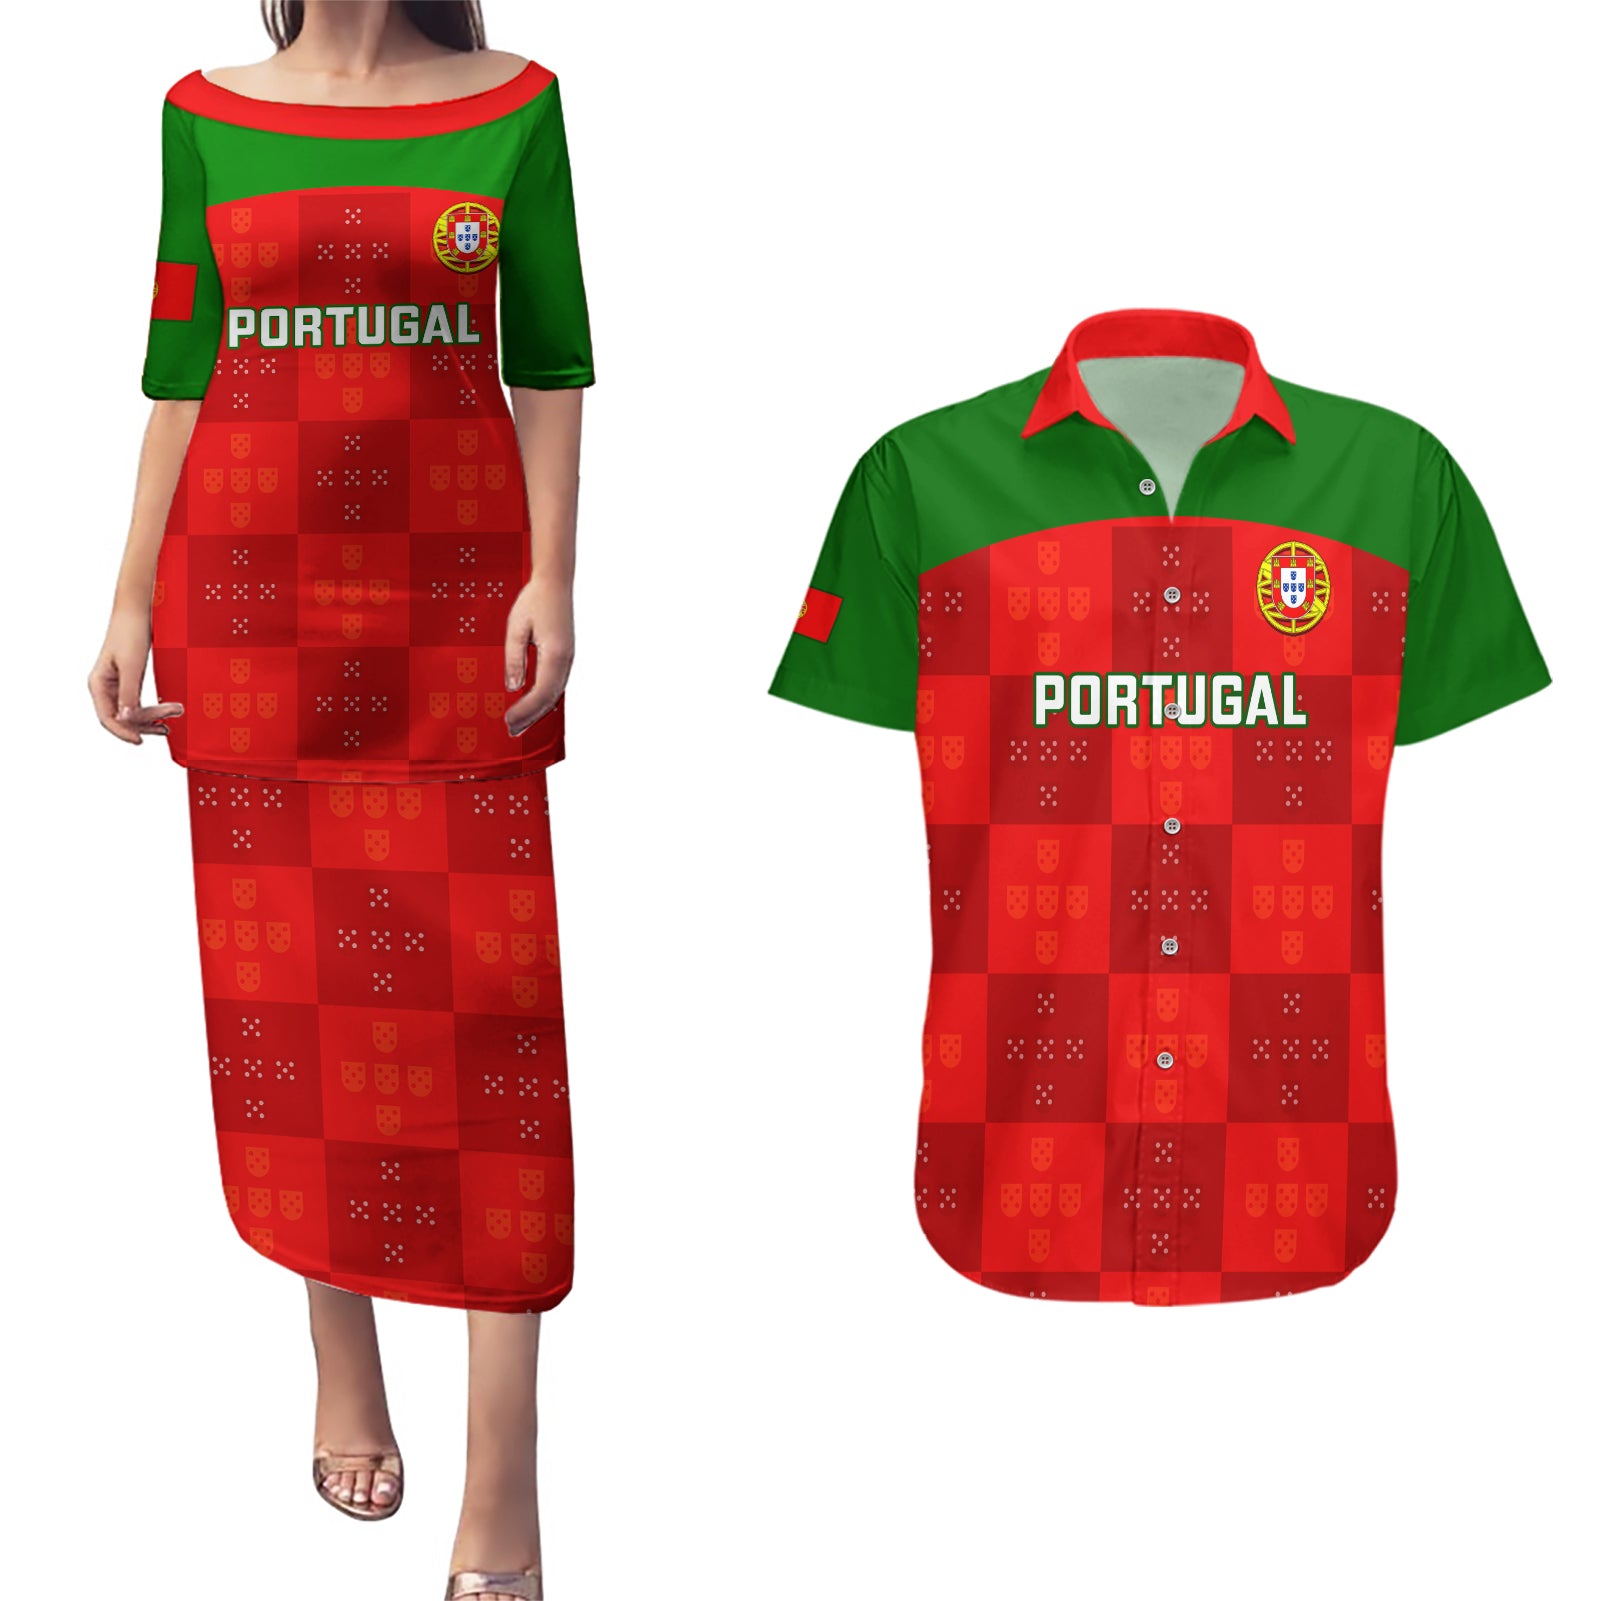 custom-portugal-rugby-couples-matching-puletasi-dress-and-hawaiian-shirt-go-wolves-mix-coat-of-arms